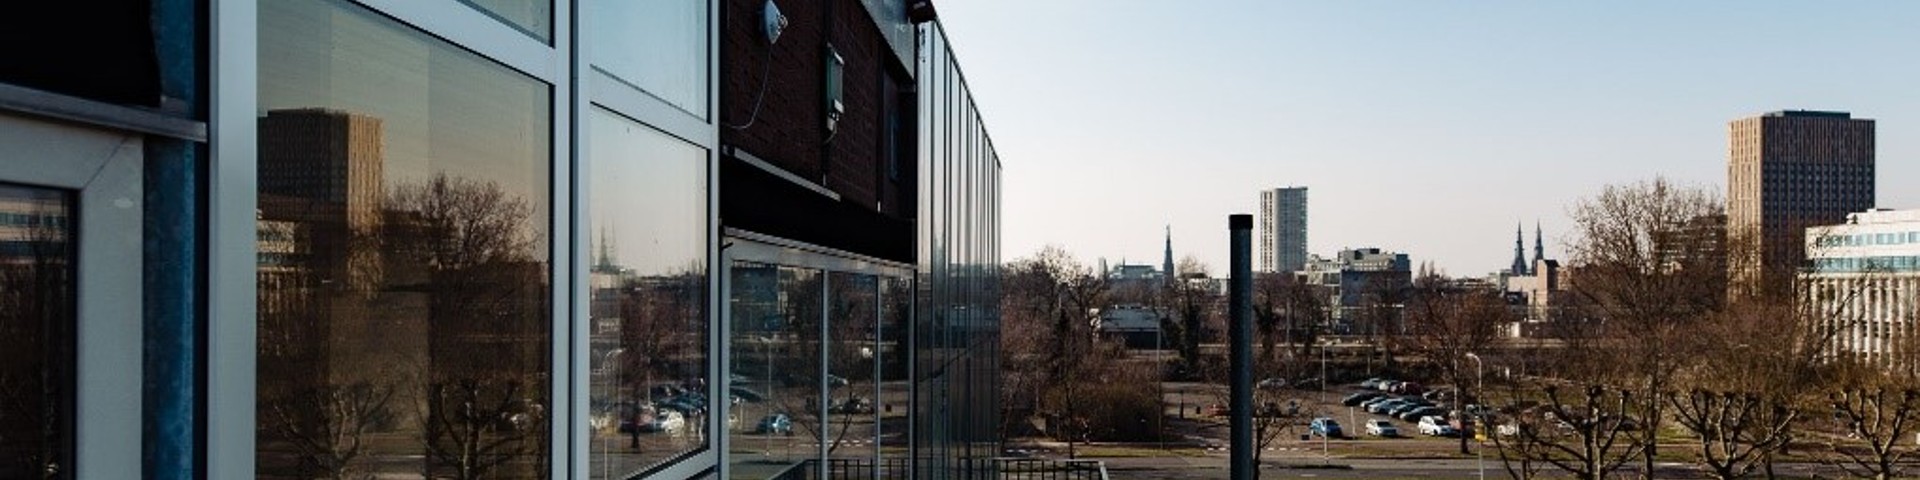 Close up of a glass building with many windows with the city in the background